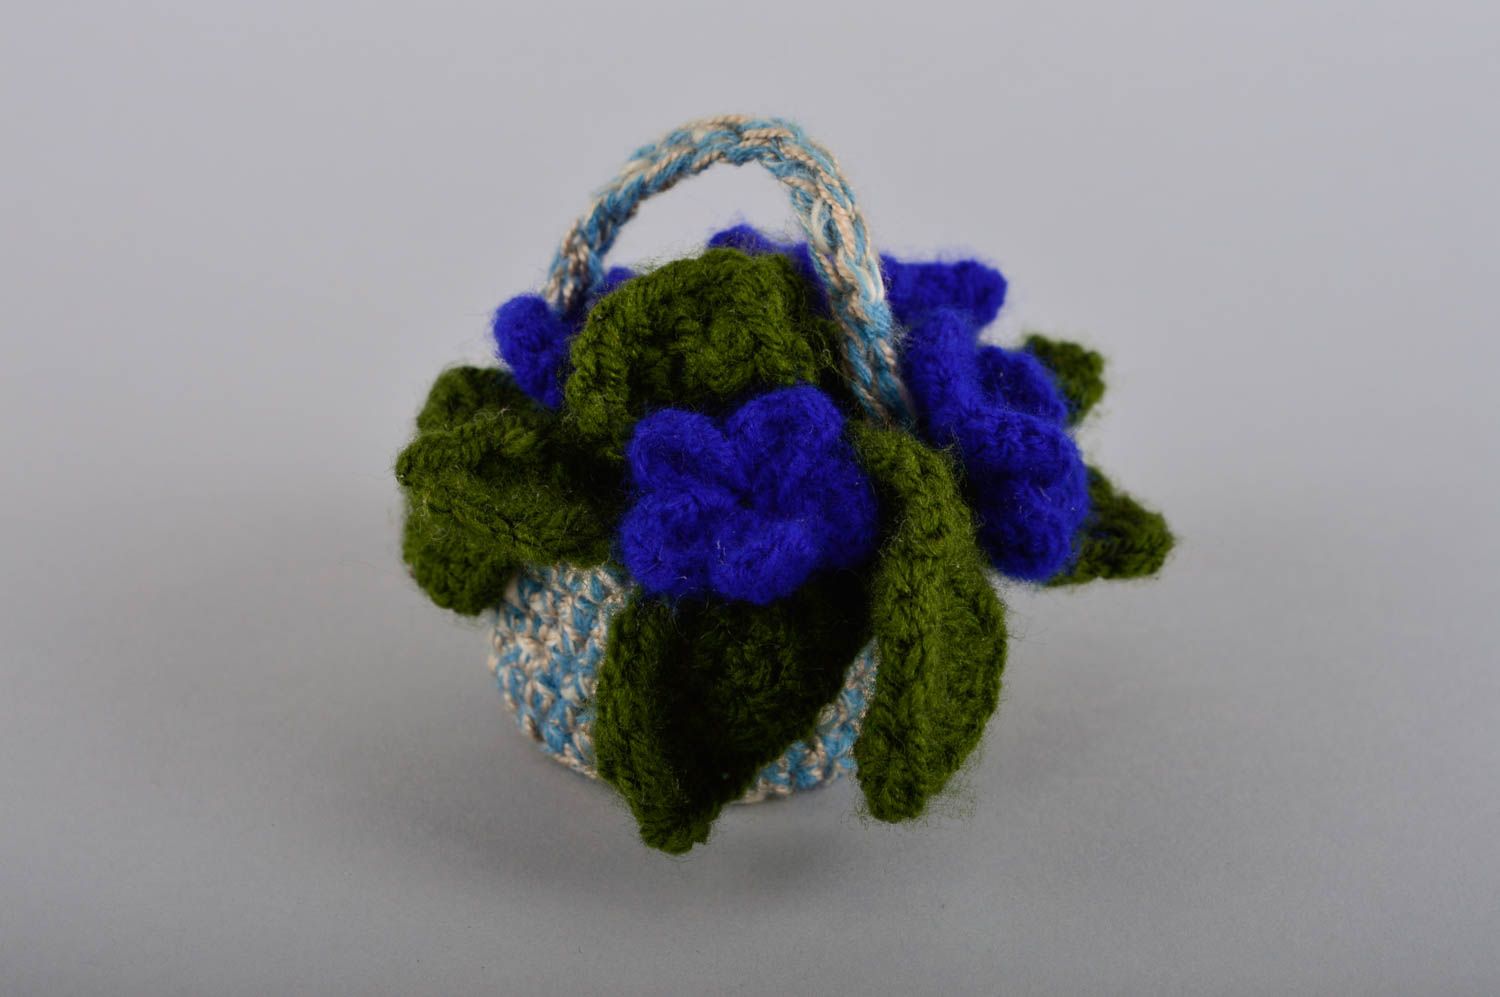 Handmade decorative composition with flowers crocheted home decor ideas photo 2